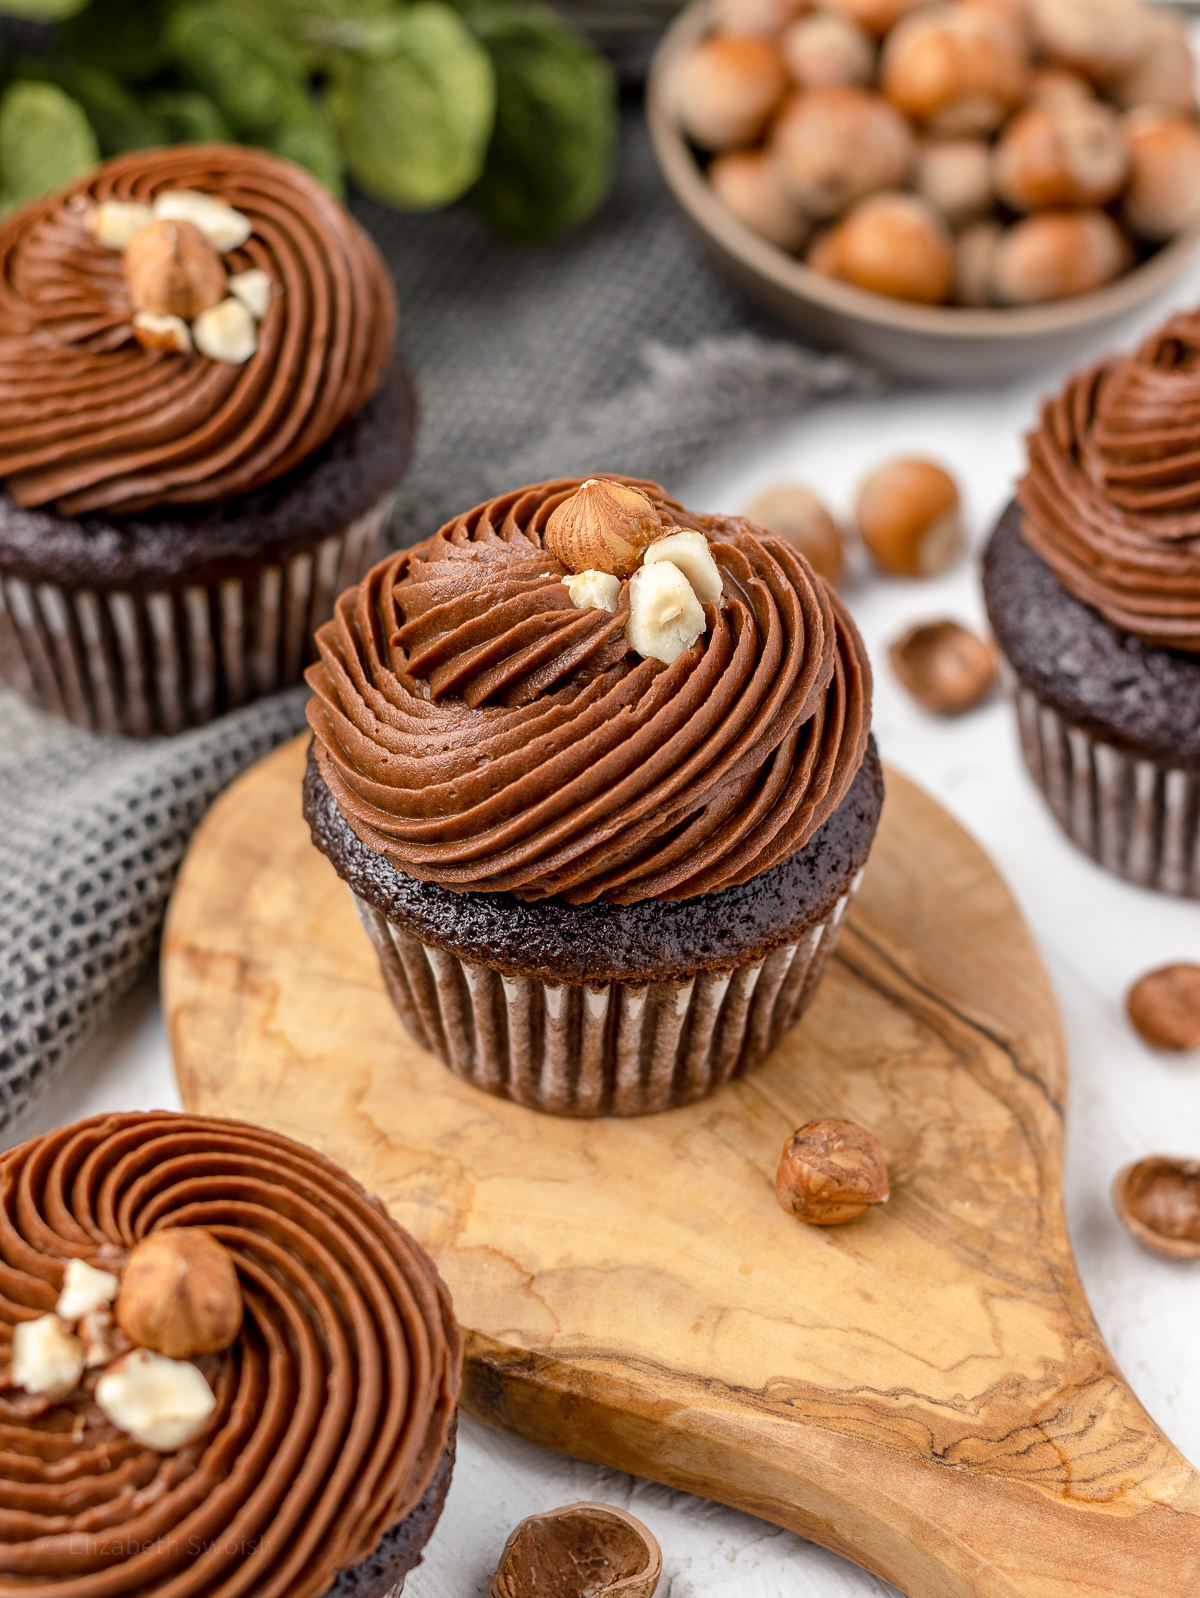 Nutella cupcakes topped with Nutella buttercream and toasted hazelnuts.